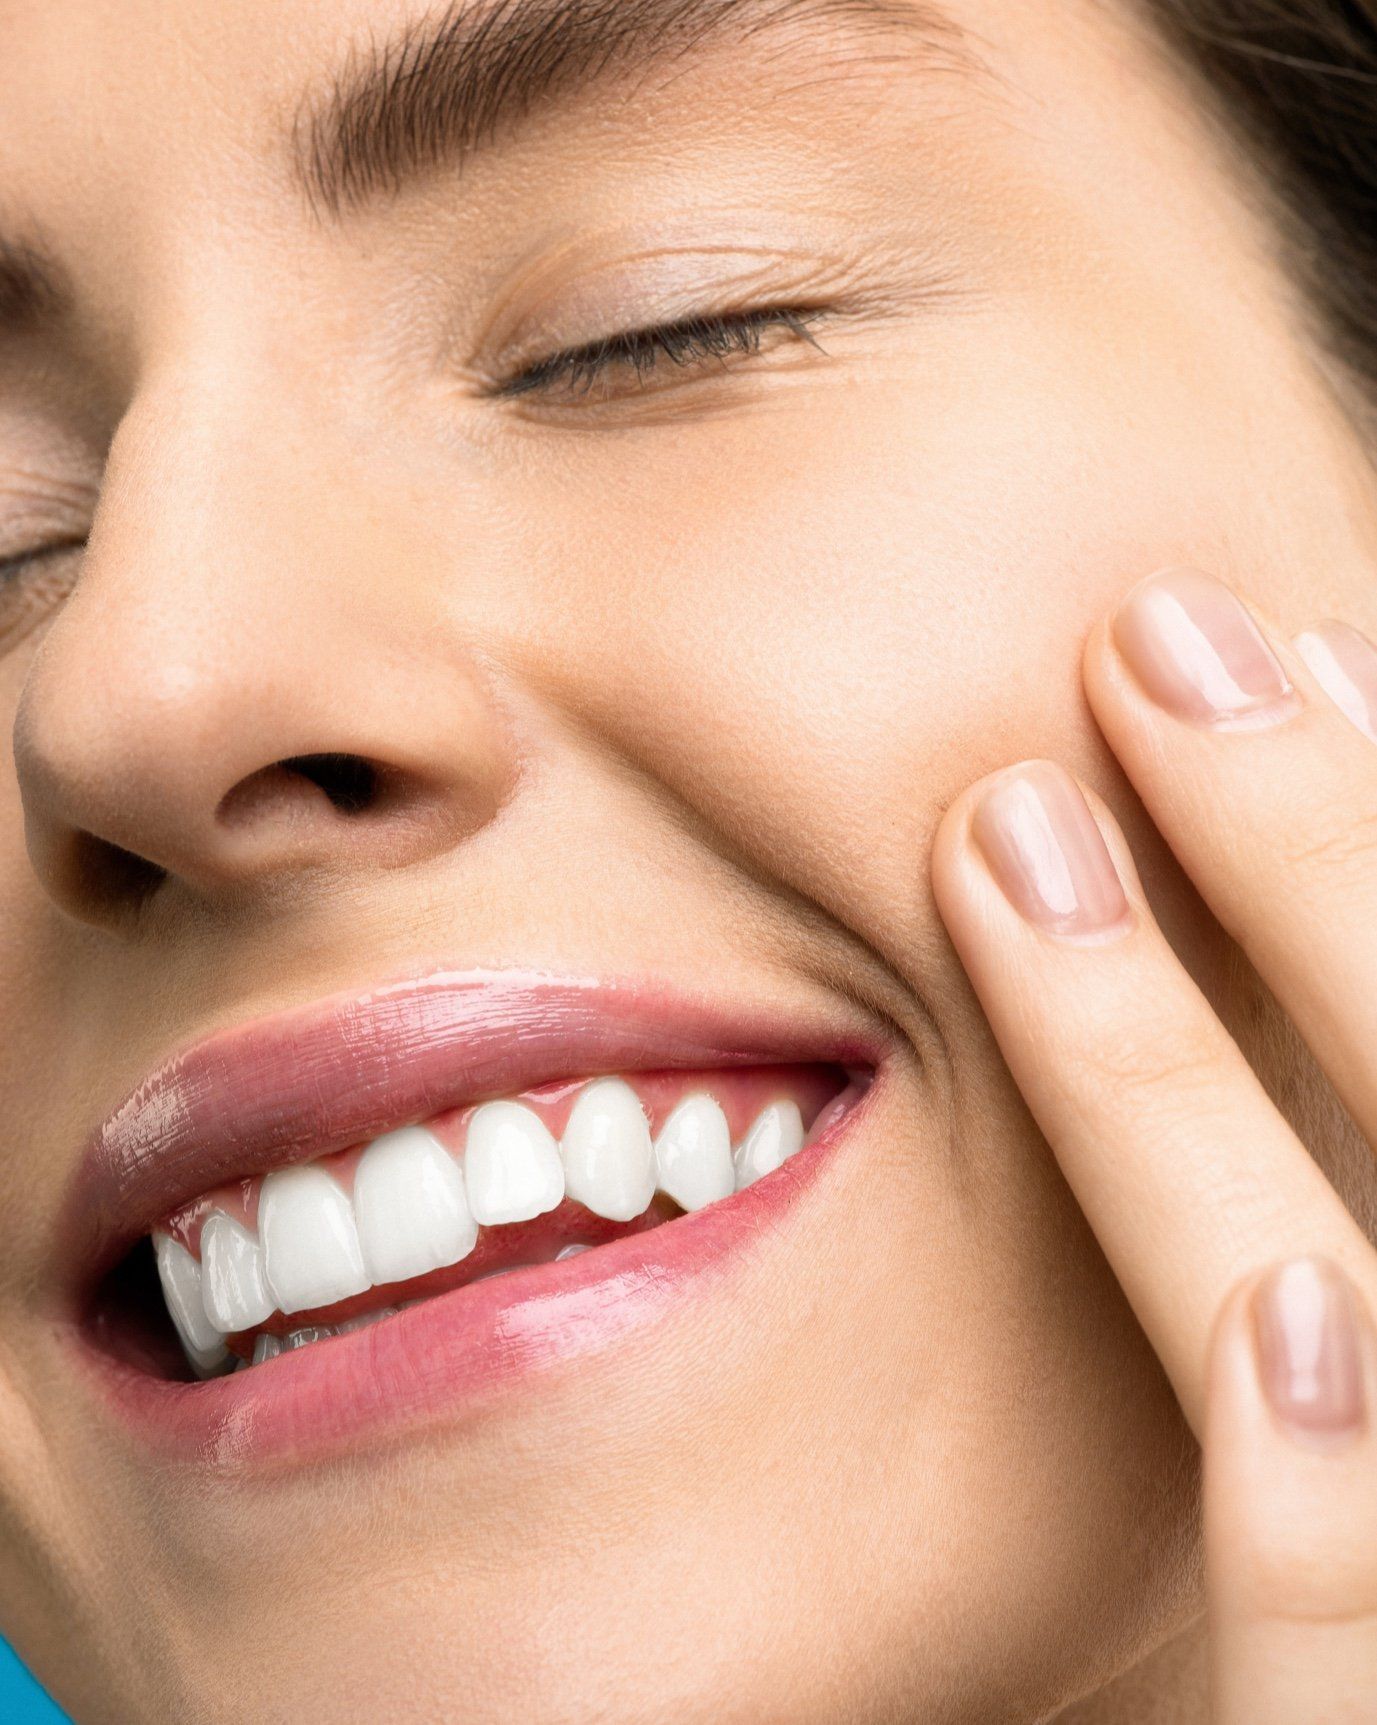 A woman is smiling and touching her face with her hand